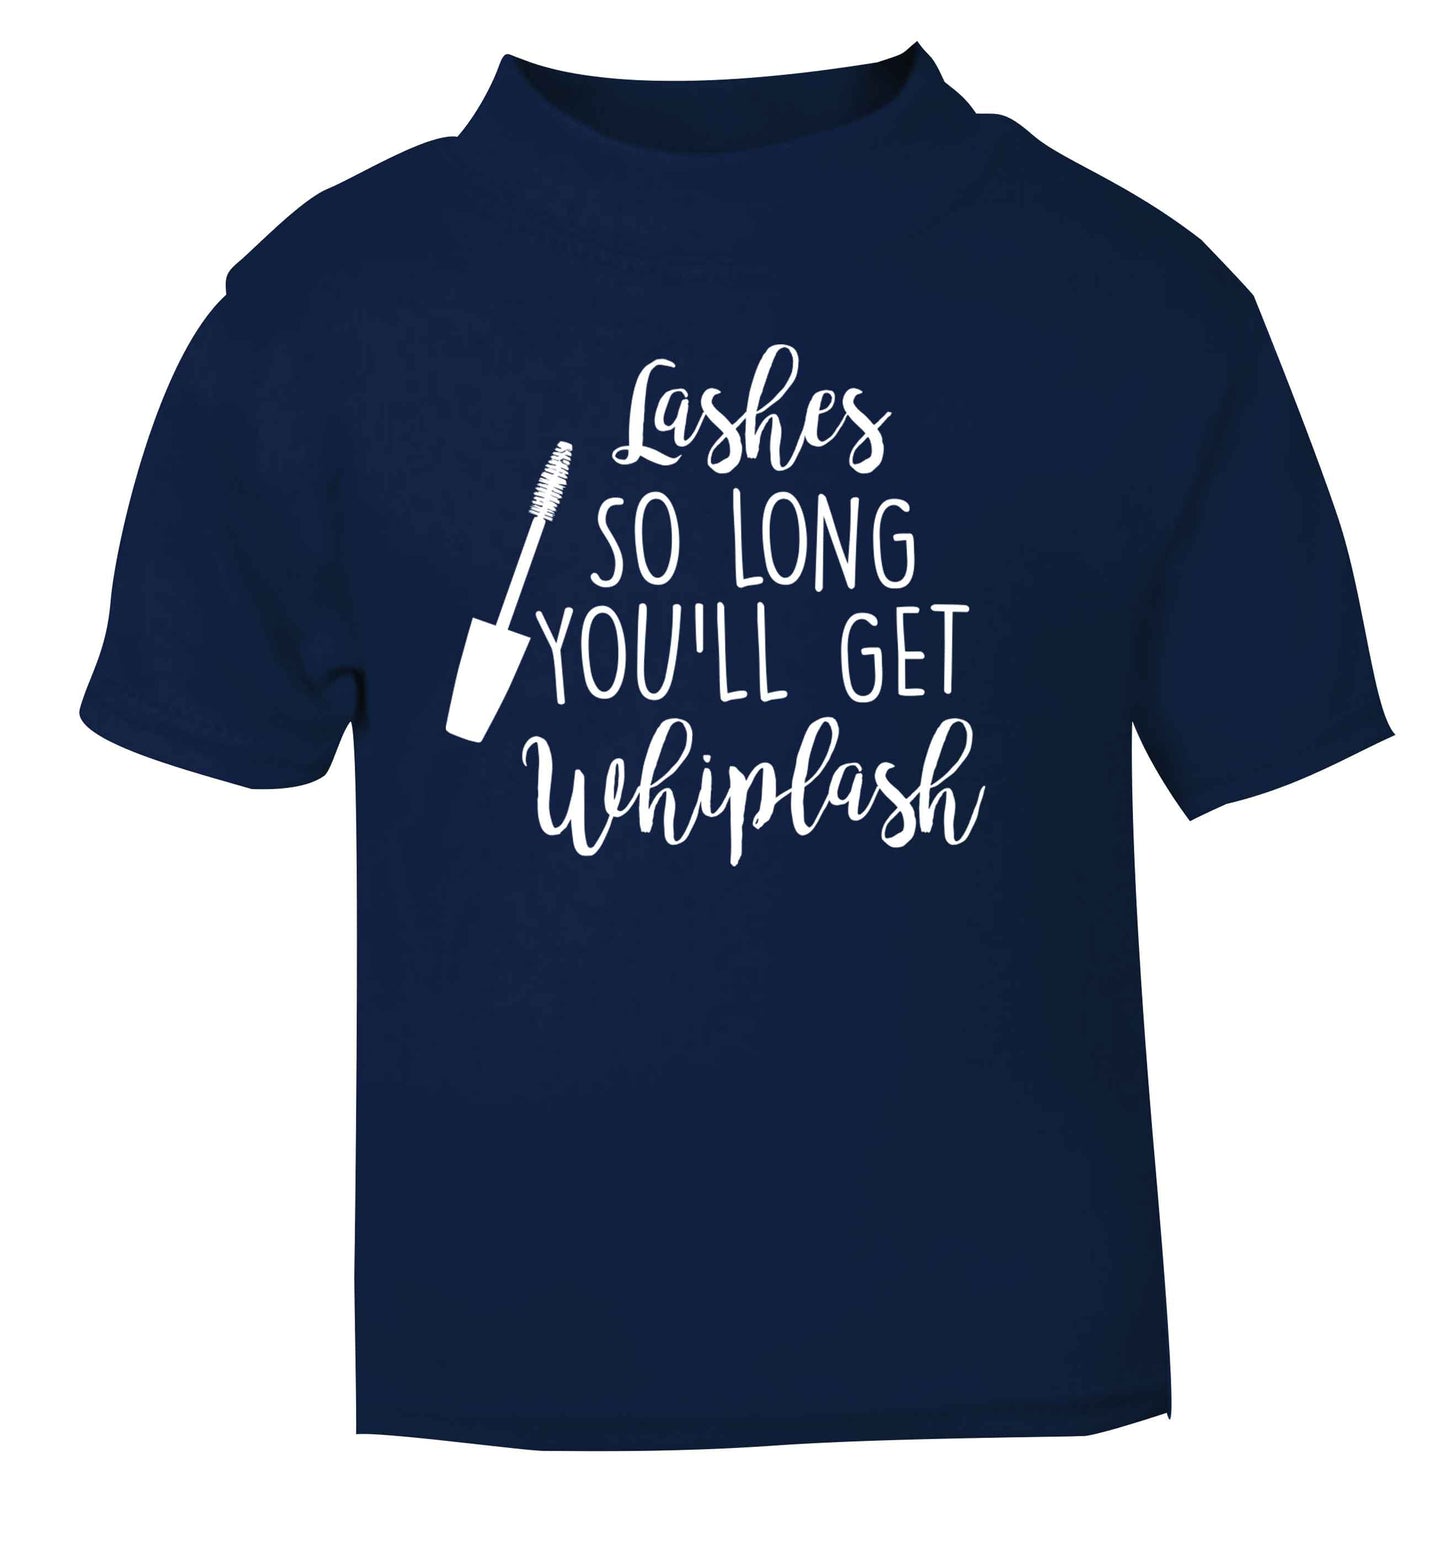 Lashes so long you'll get whiplash navy Baby Toddler Tshirt 2 Years